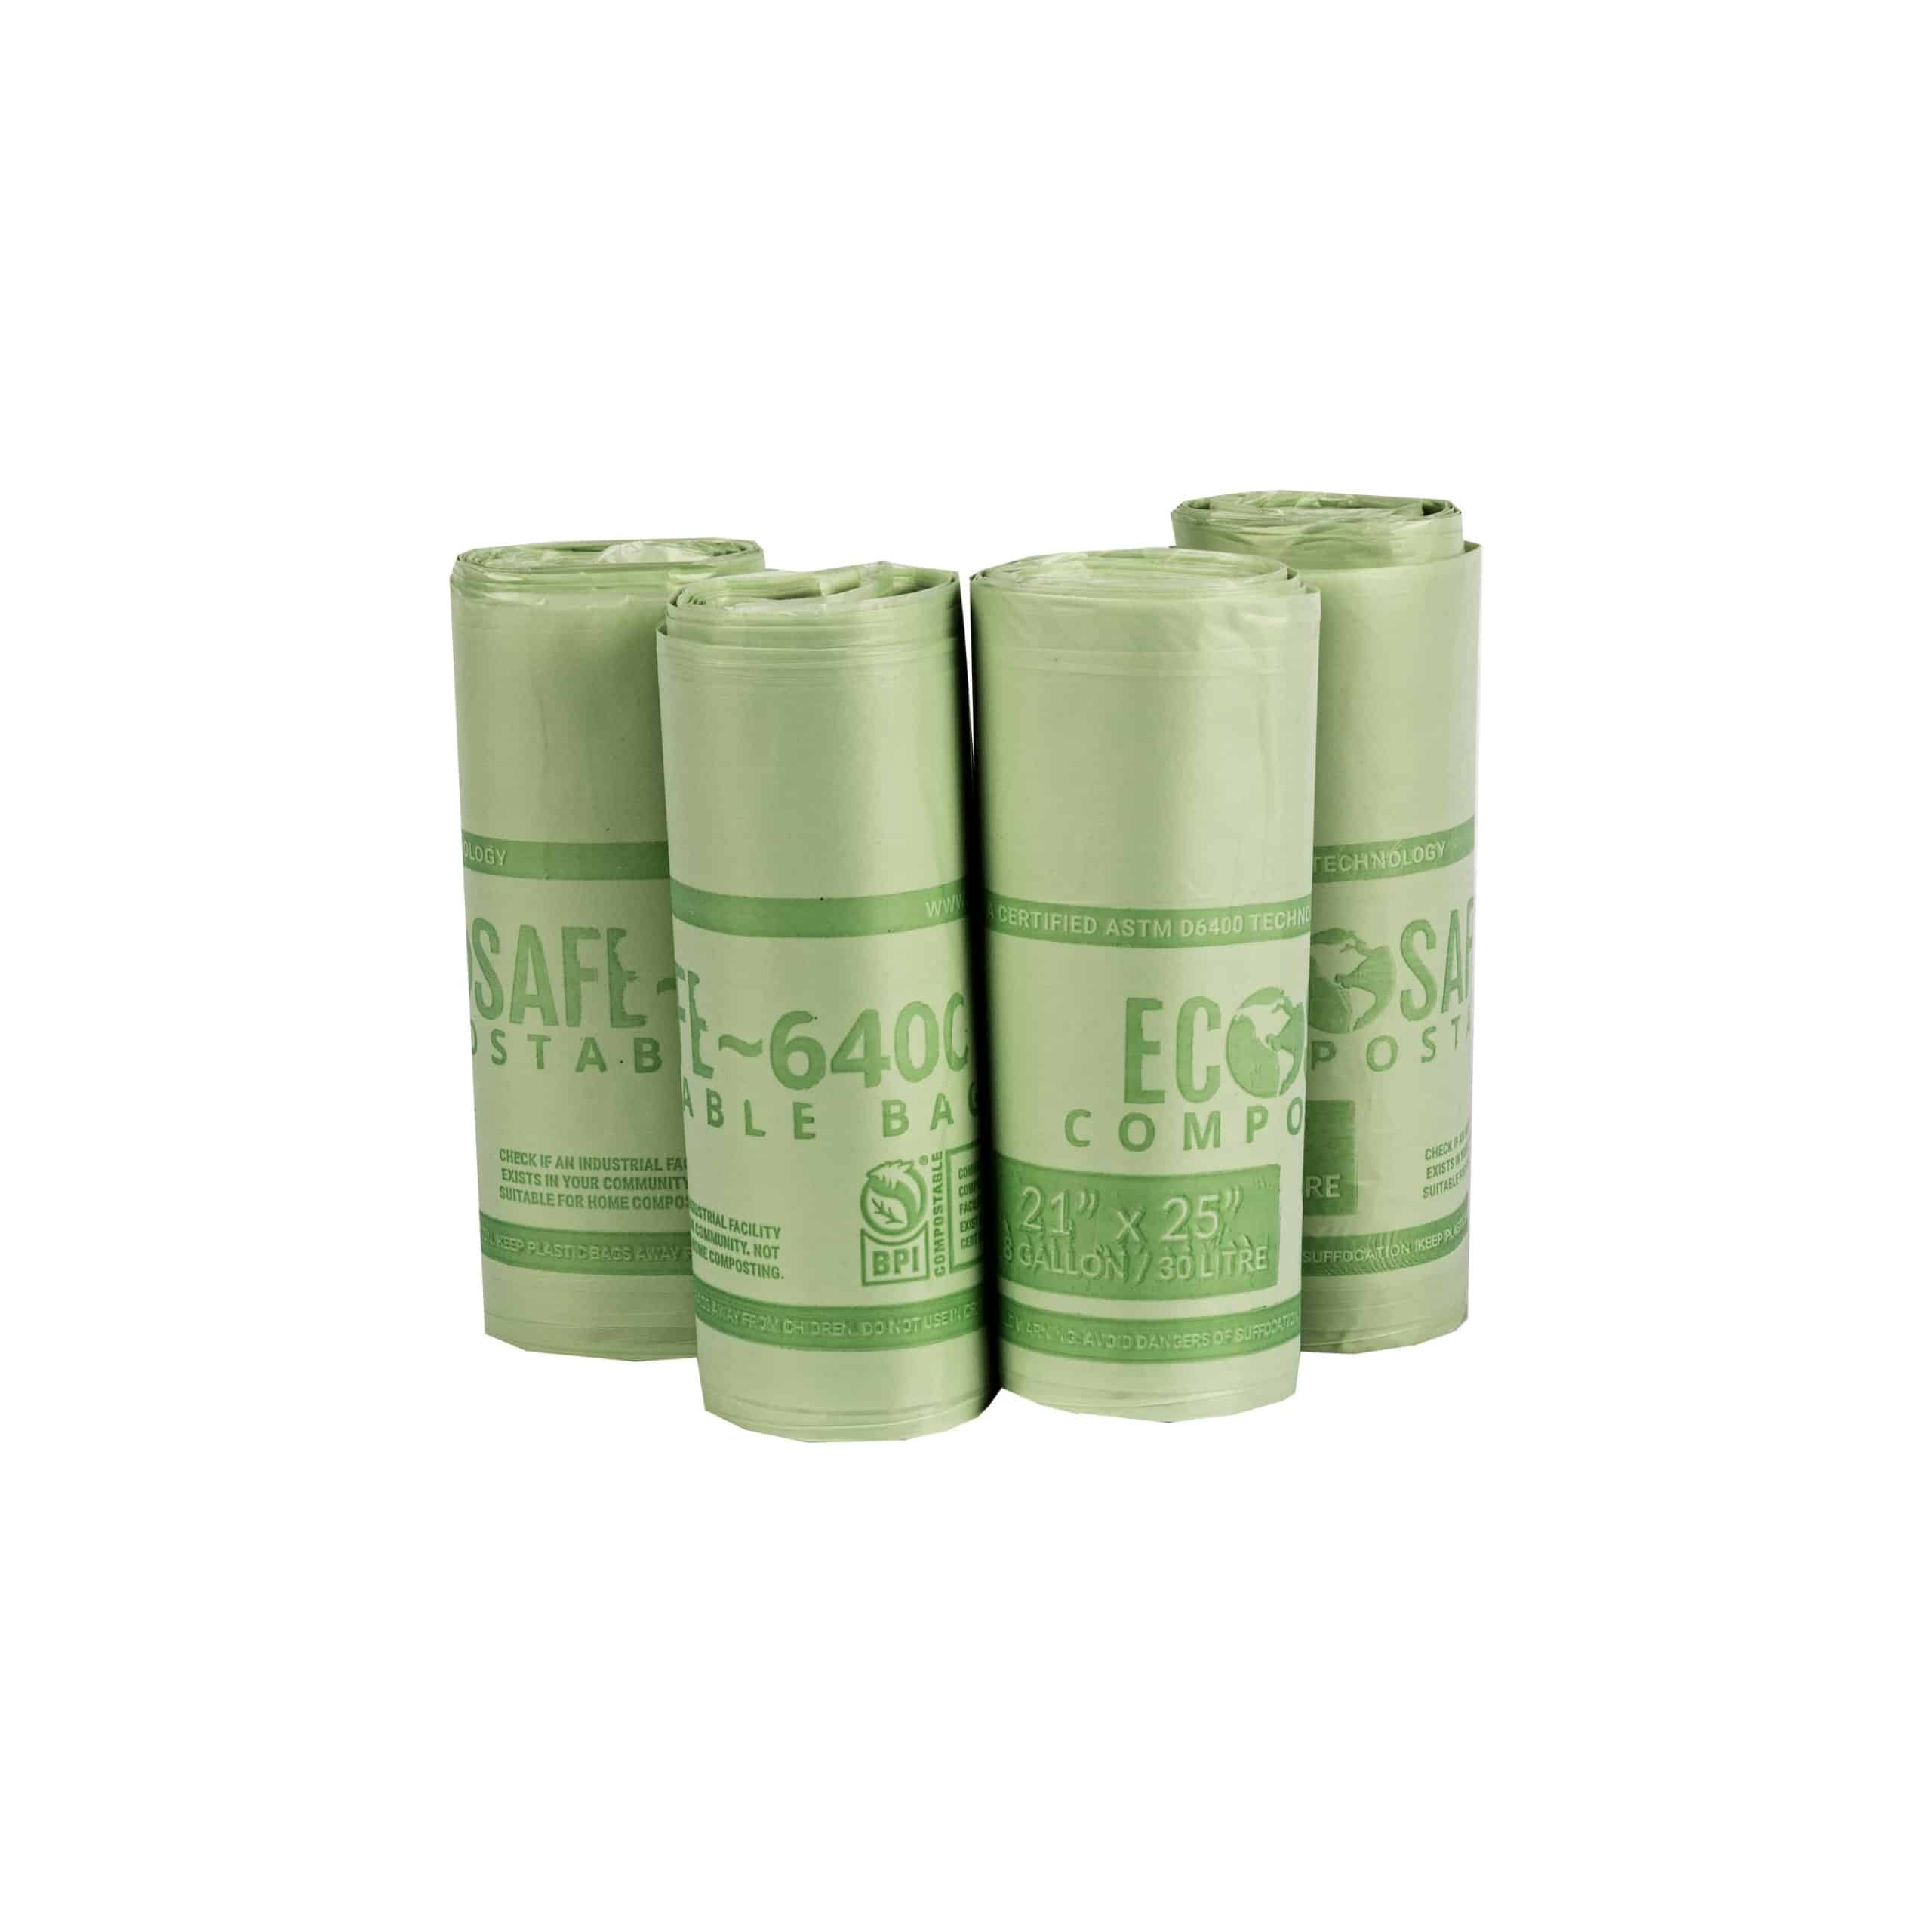 EcoSafe-Compostable-Bags-HB2125-6-Rolls-min